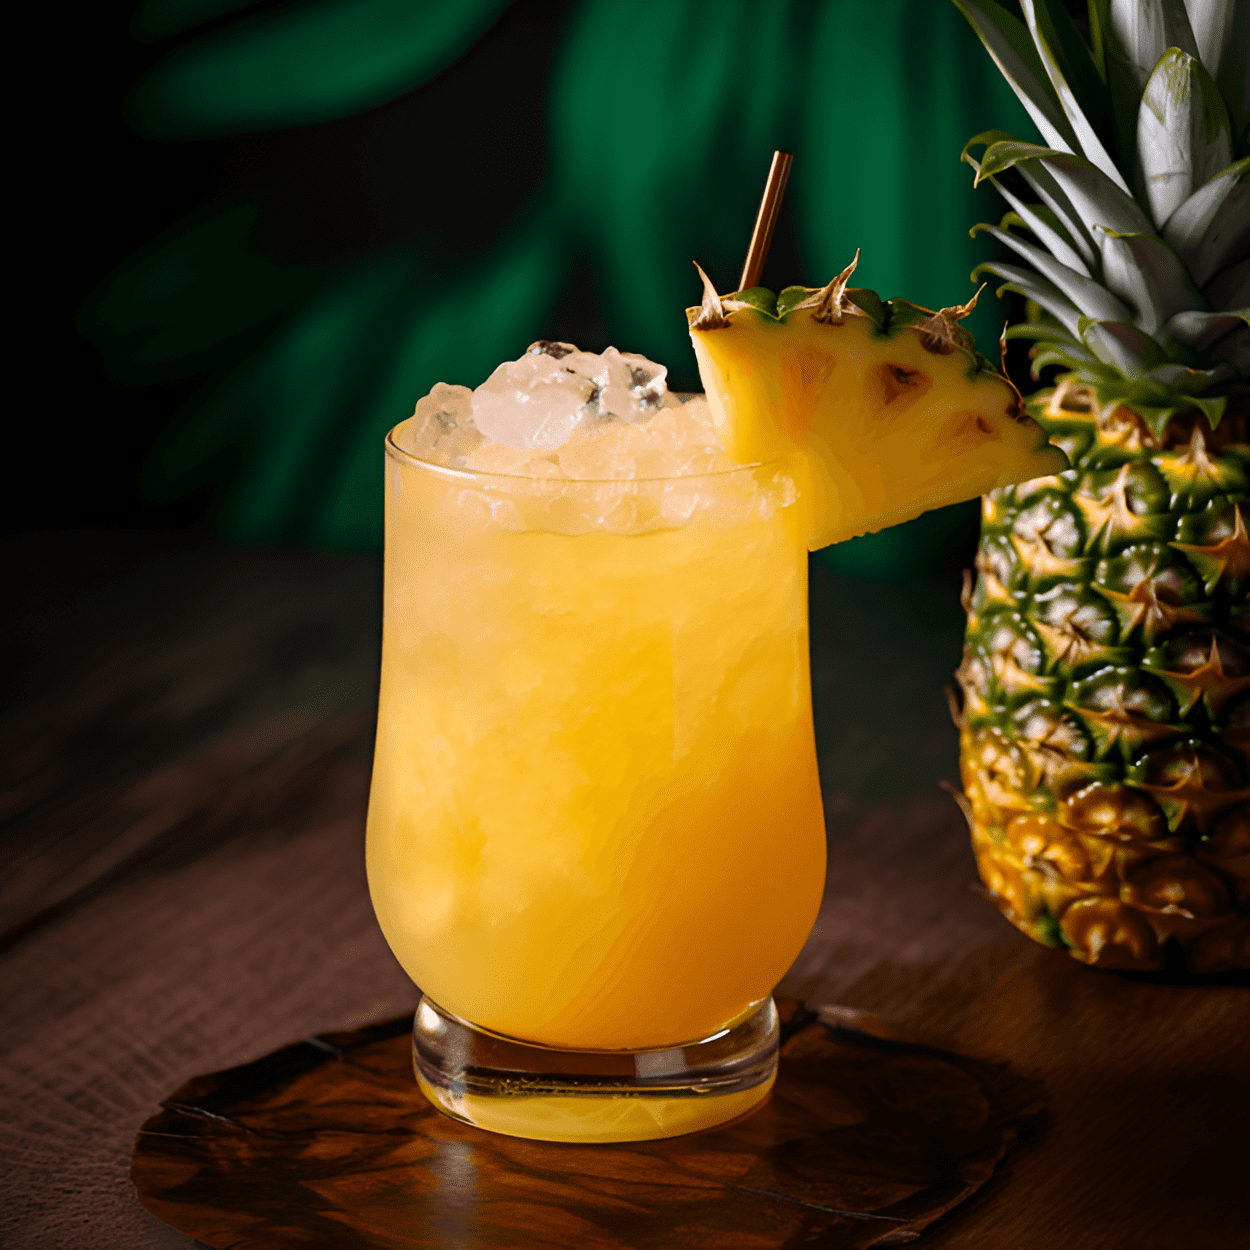 Pikachu Ing Cocktail Recipe - The Pikachu Ing cocktail is a delightful blend of sweet and sour, with a hint of tropical fruitiness. The pineapple juice gives it a sweet, tangy flavor, while the lemon juice adds a refreshing sour note. The vodka gives it a strong kick, making it a lively and exciting drink.